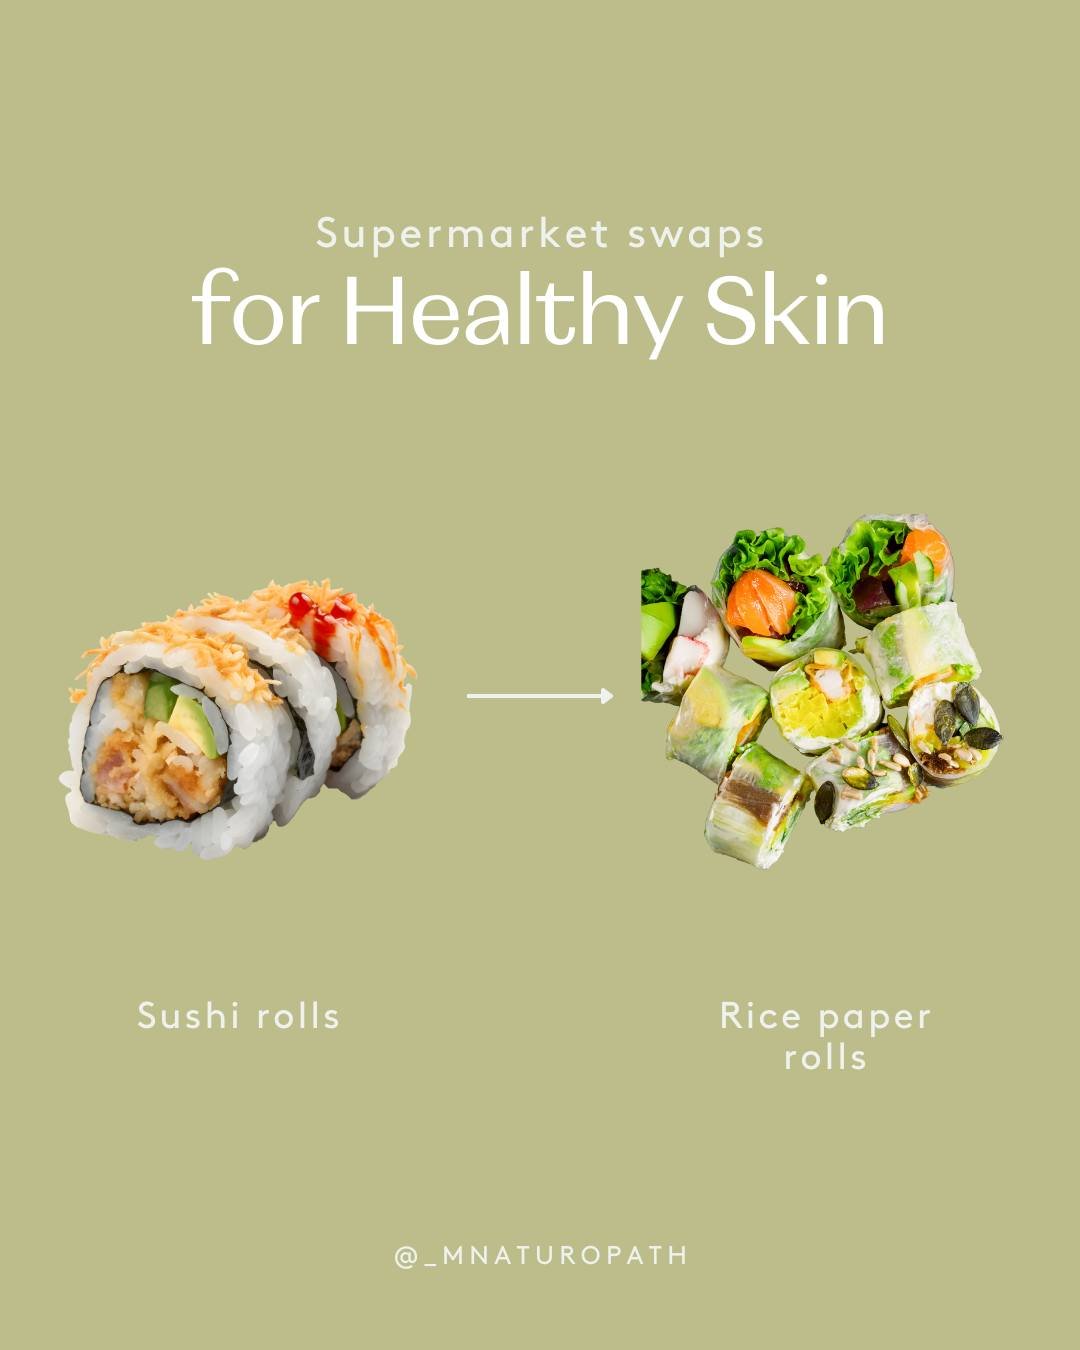 Struggling with skin? Try these quick and easy supermarket swaps&hellip; 🌱 

Swap your sushi for rice paper rolls! More nutrients and less carbs!

Swap your regular pasta for pulse pasta - contains resistant starch which feeds your gut microbes.
 Op